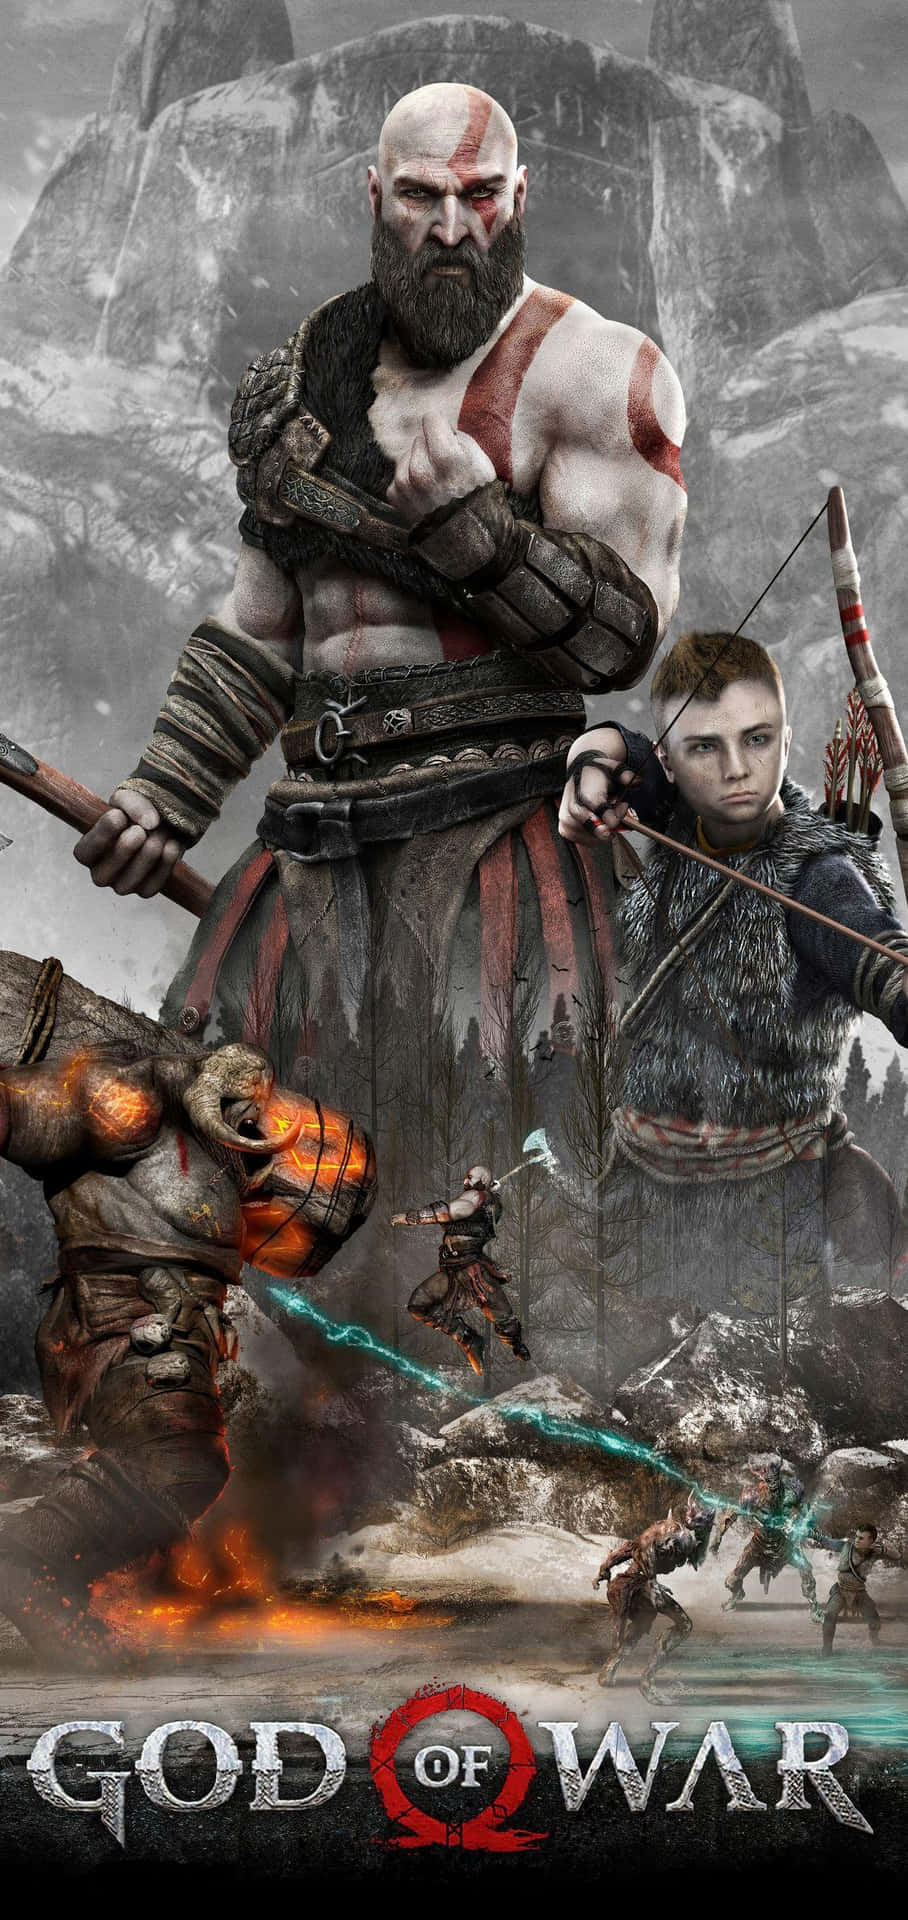 God of War Characters - Kratos and Atreus in Epic Battle Pose Wallpaper